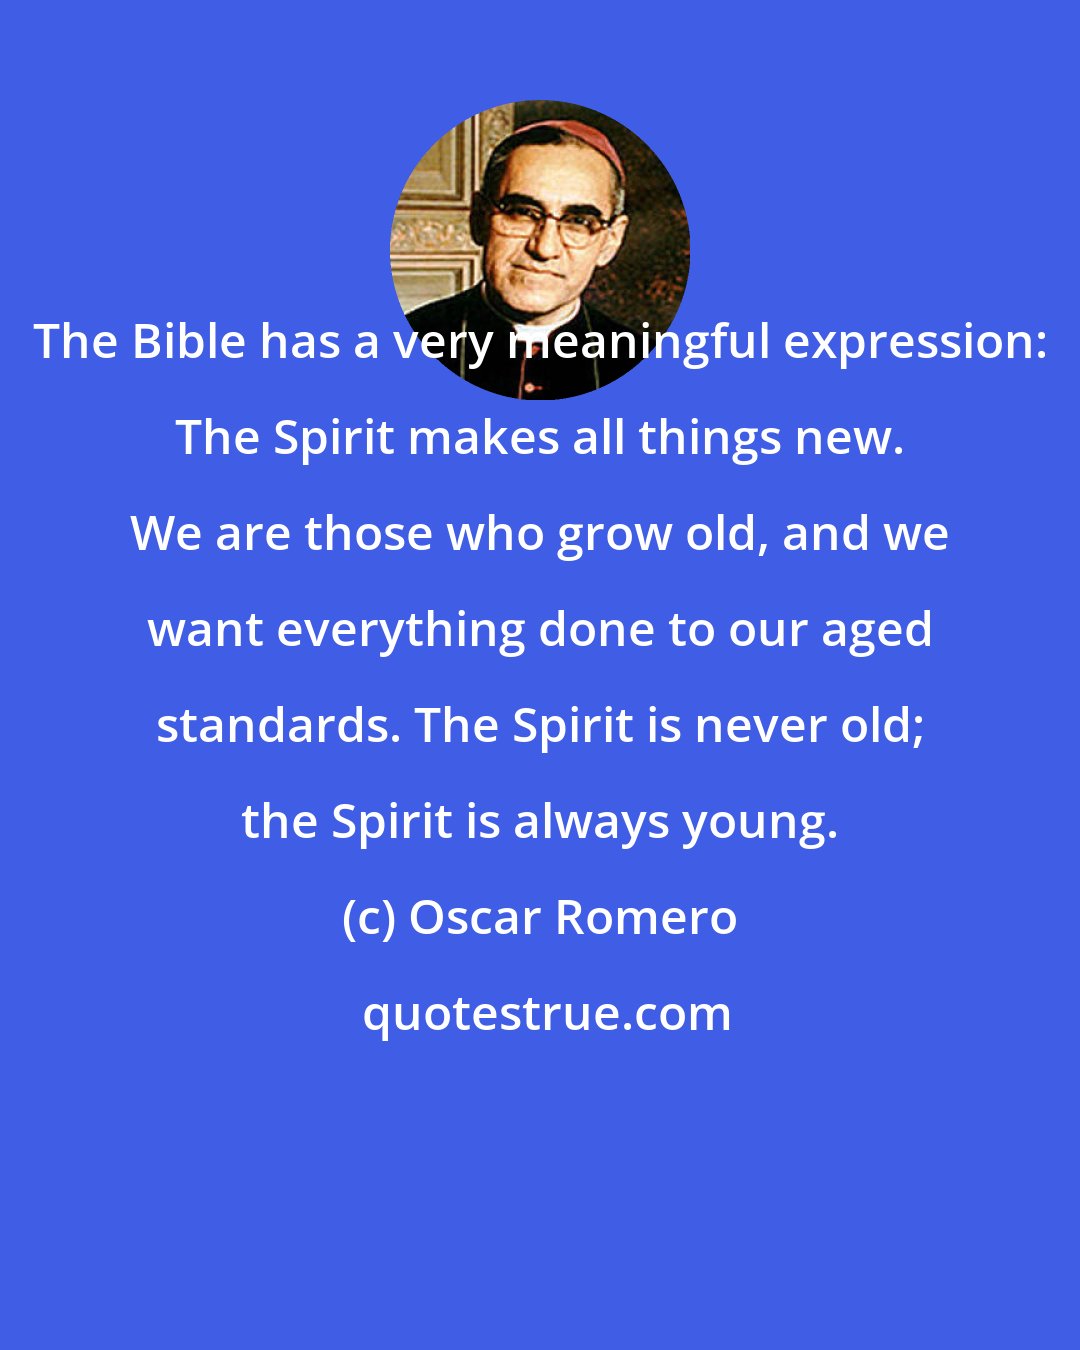 Oscar Romero: The Bible has a very meaningful expression: The Spirit makes all things new. We are those who grow old, and we want everything done to our aged standards. The Spirit is never old; the Spirit is always young.